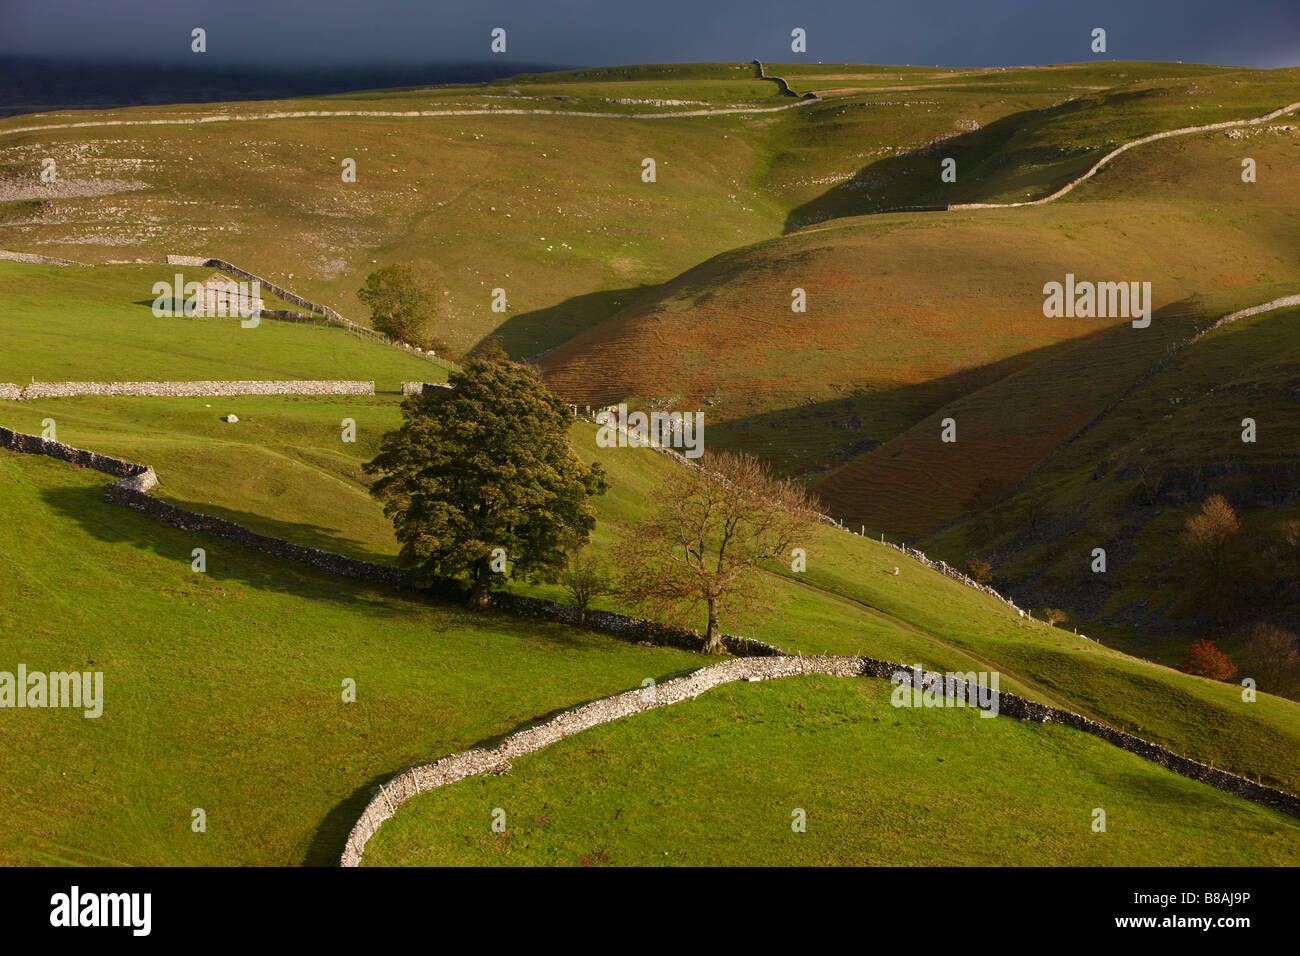 stone walls and barns nr Kettlewell, Wharfedale, Yorkshire Dales National Park, England, UK Stock Photo